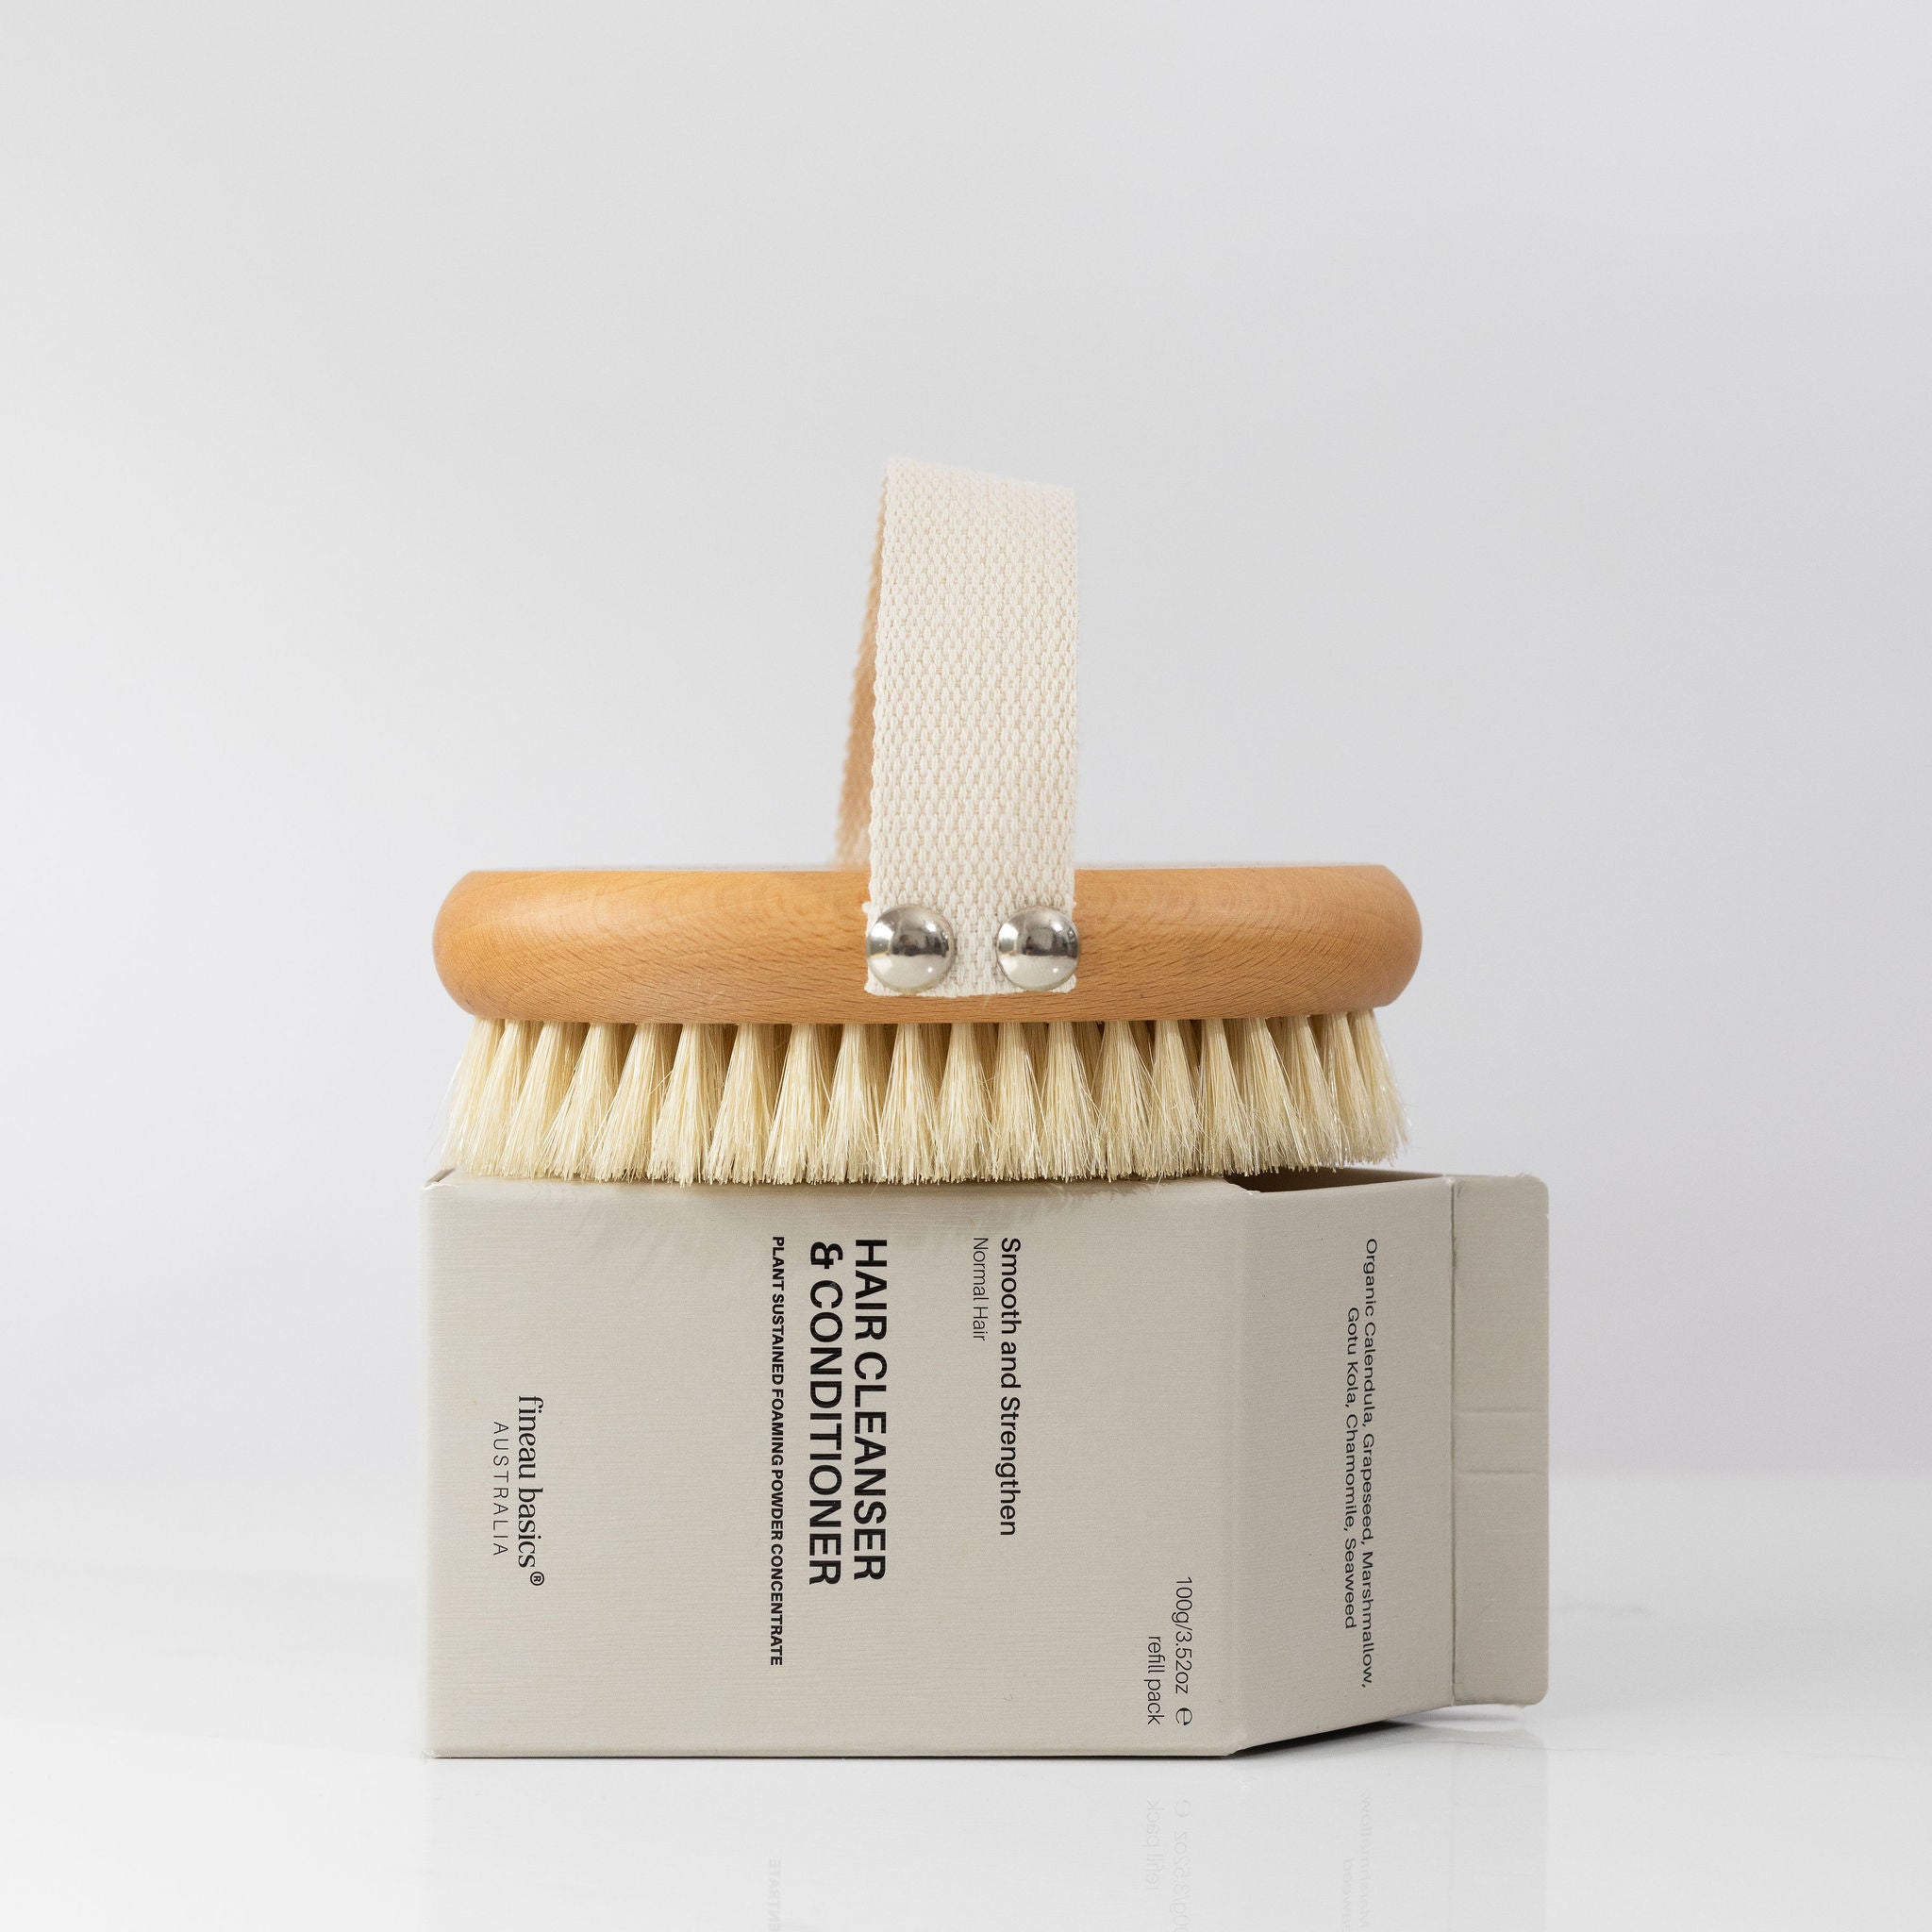 Waterless-sustainable-shampoo-&-conditioner-with-Dry-spa-brush